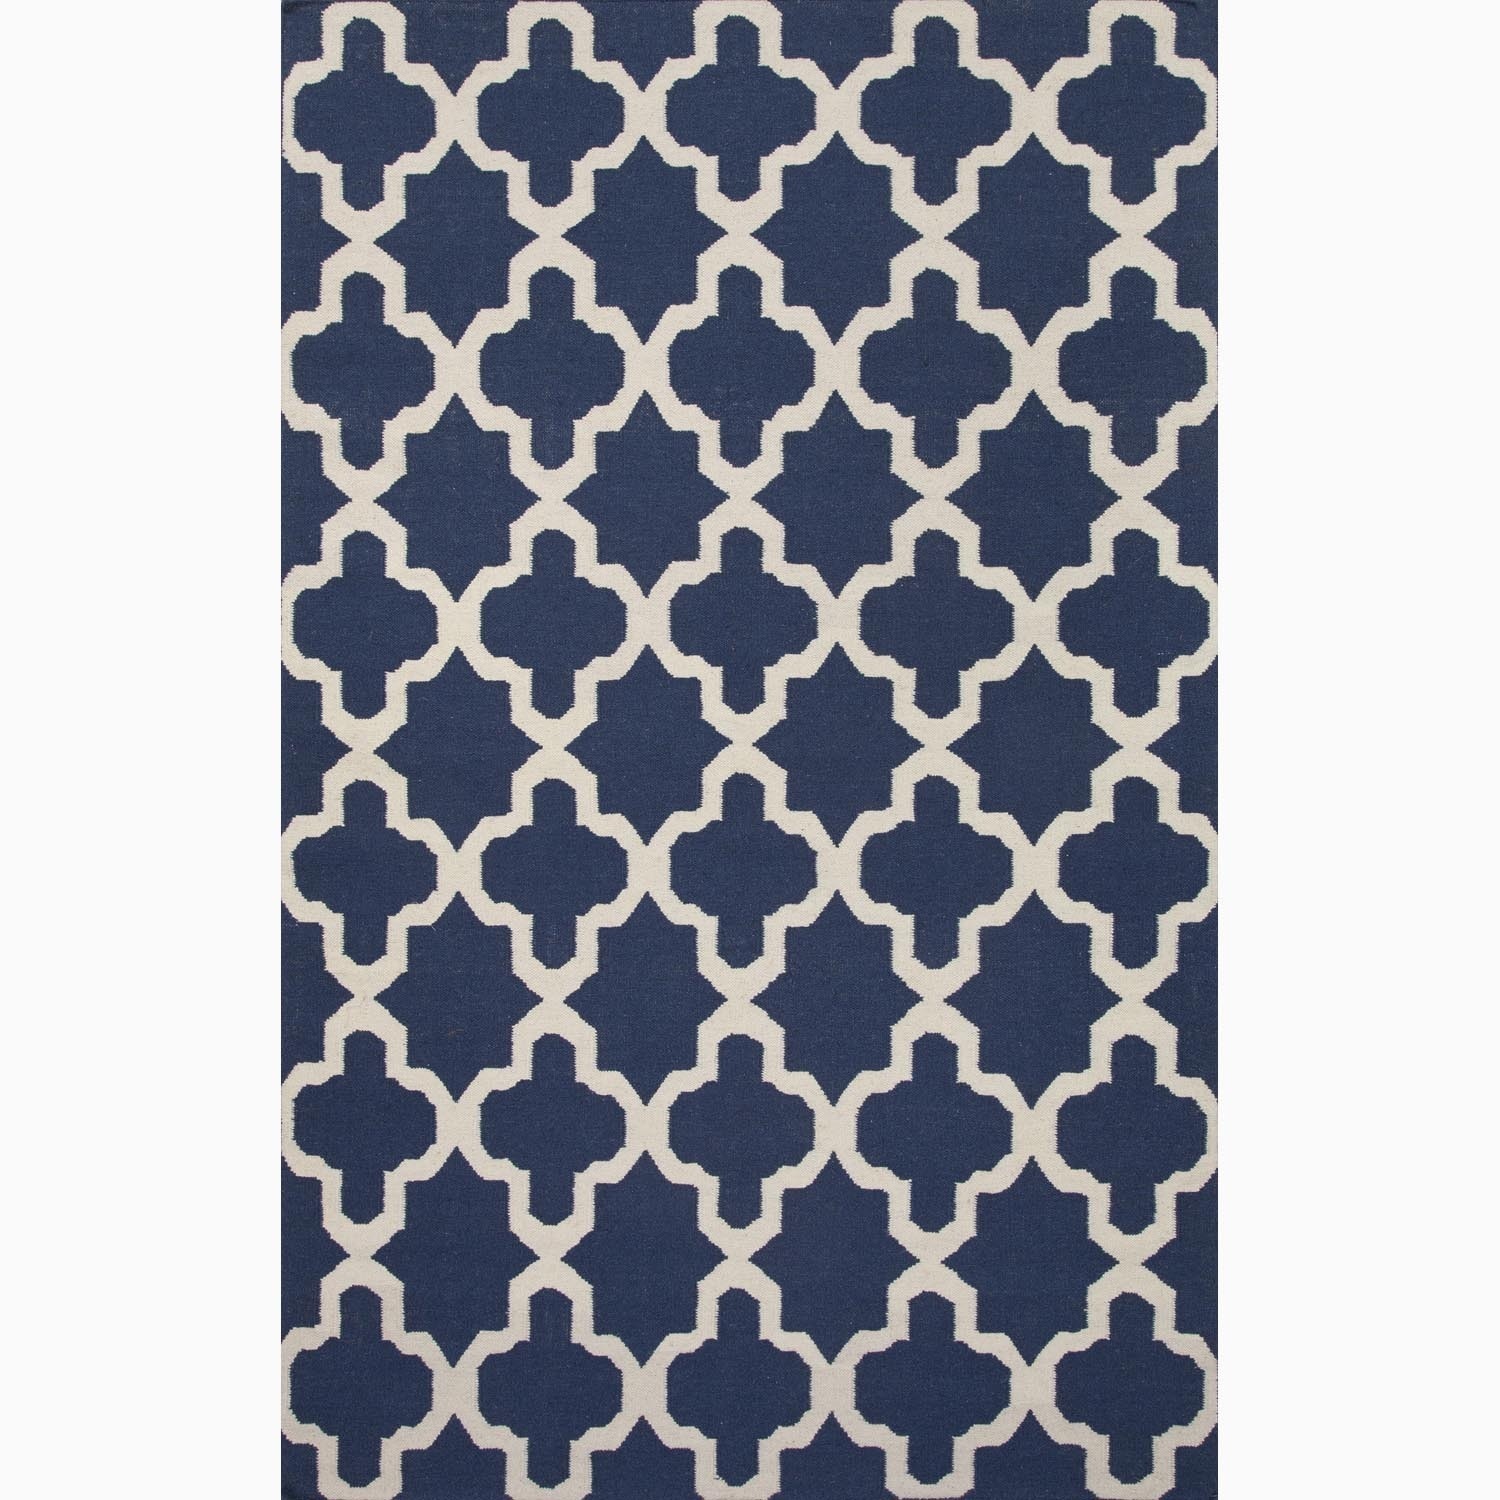 Hand made Moroccan Pattern Blue/ Ivory Wool Rug (5x8)